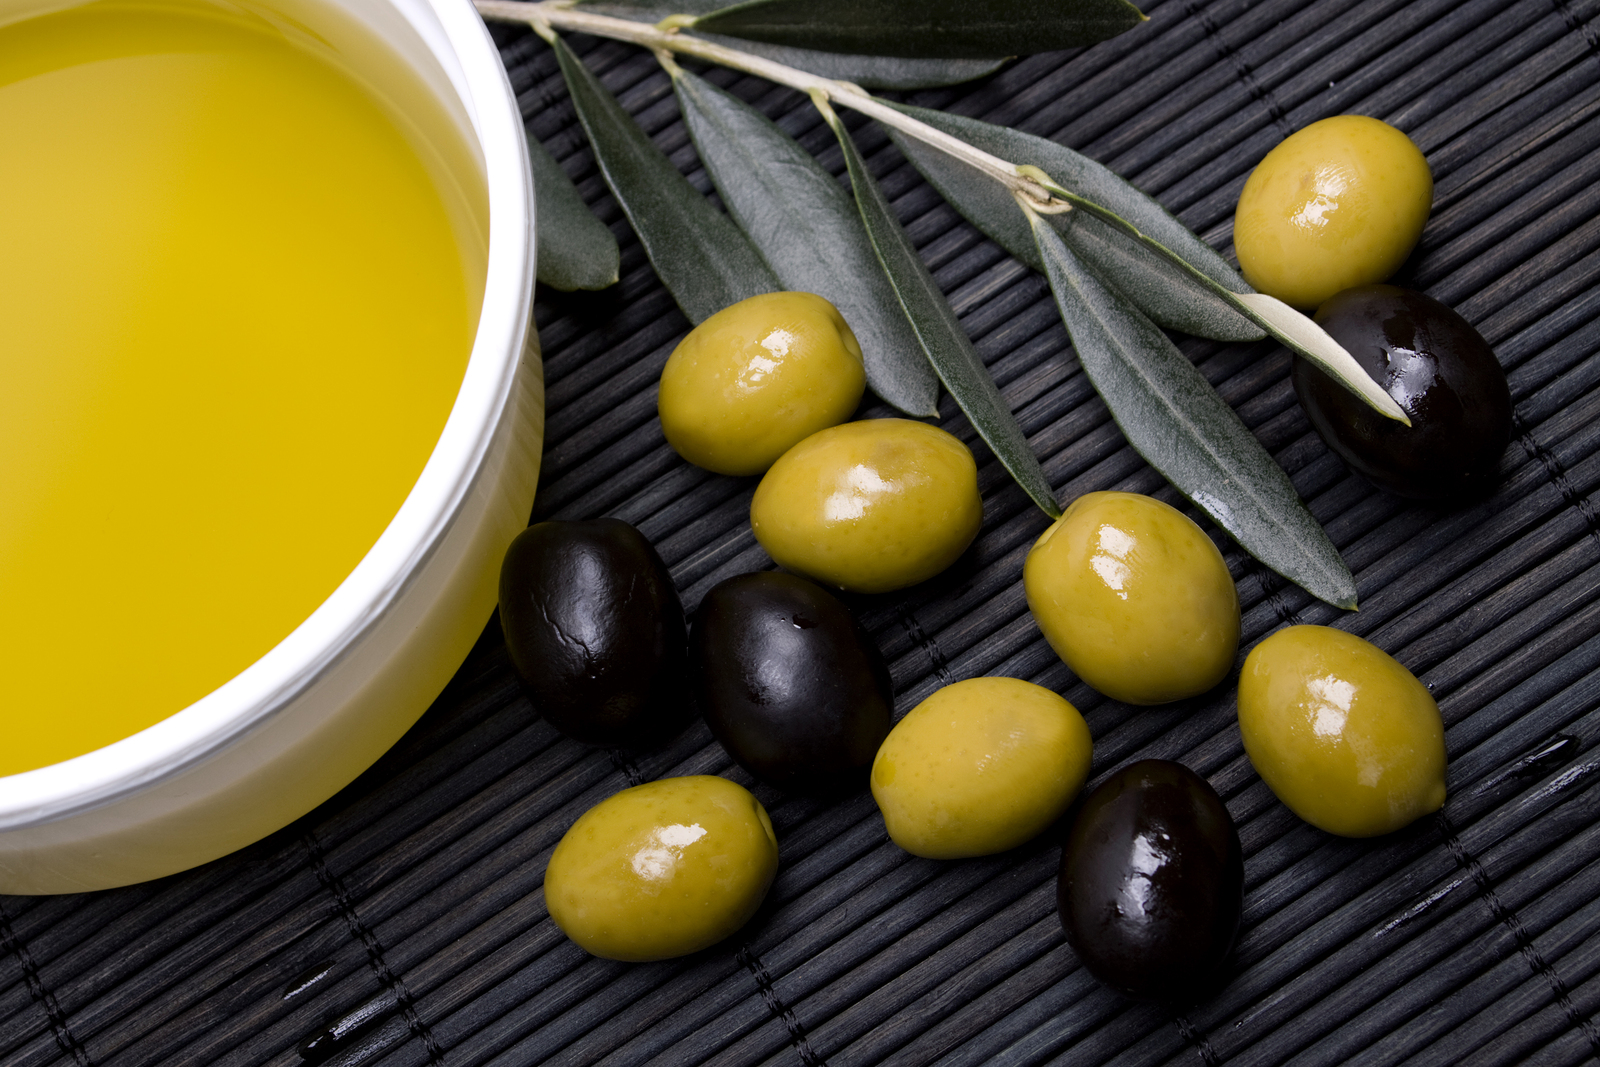 Olive oil contains virtually no Omega-3s.